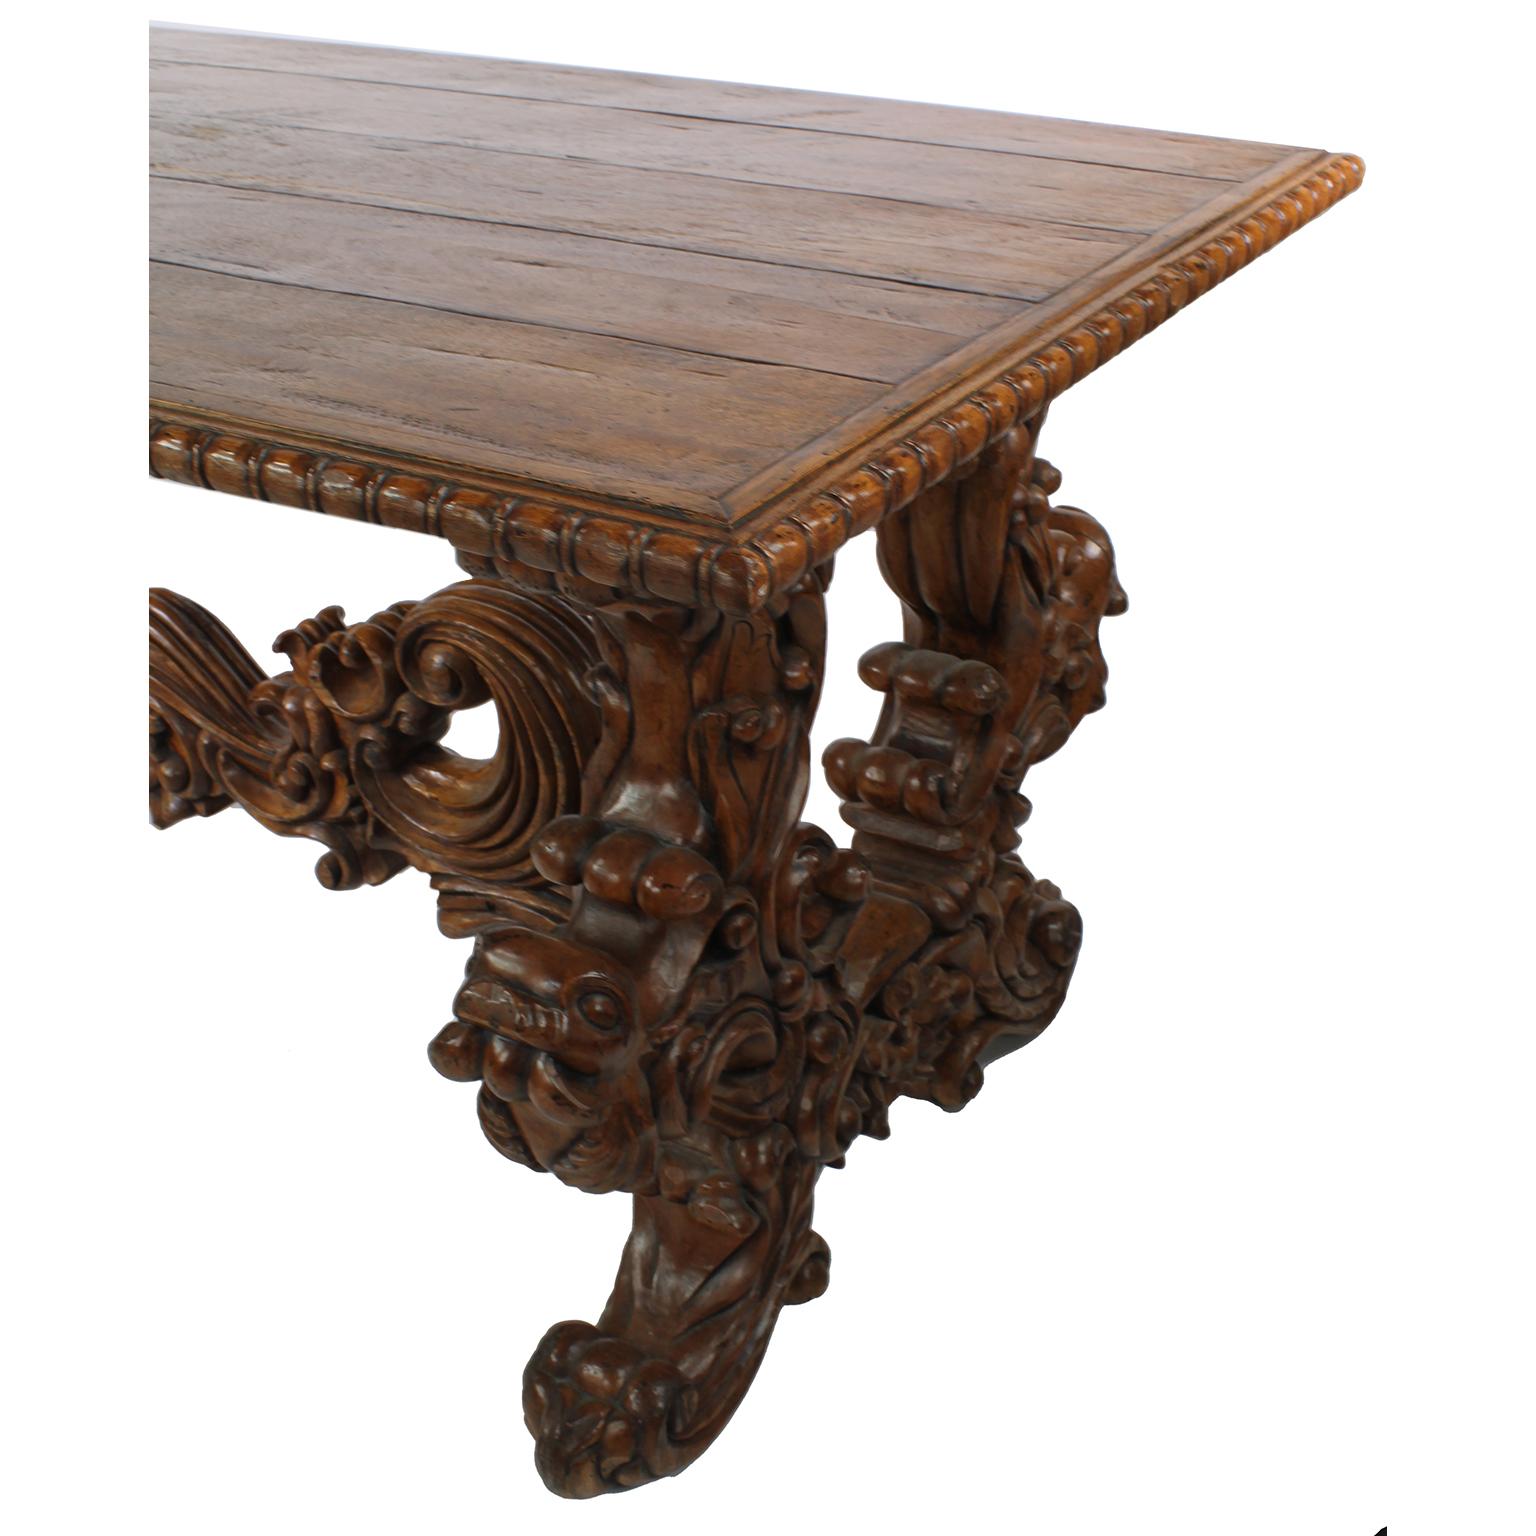 Baroque Revival Style Carved Wood Tavern or Farm Dining Pedestal Table In Fair Condition For Sale In Los Angeles, CA